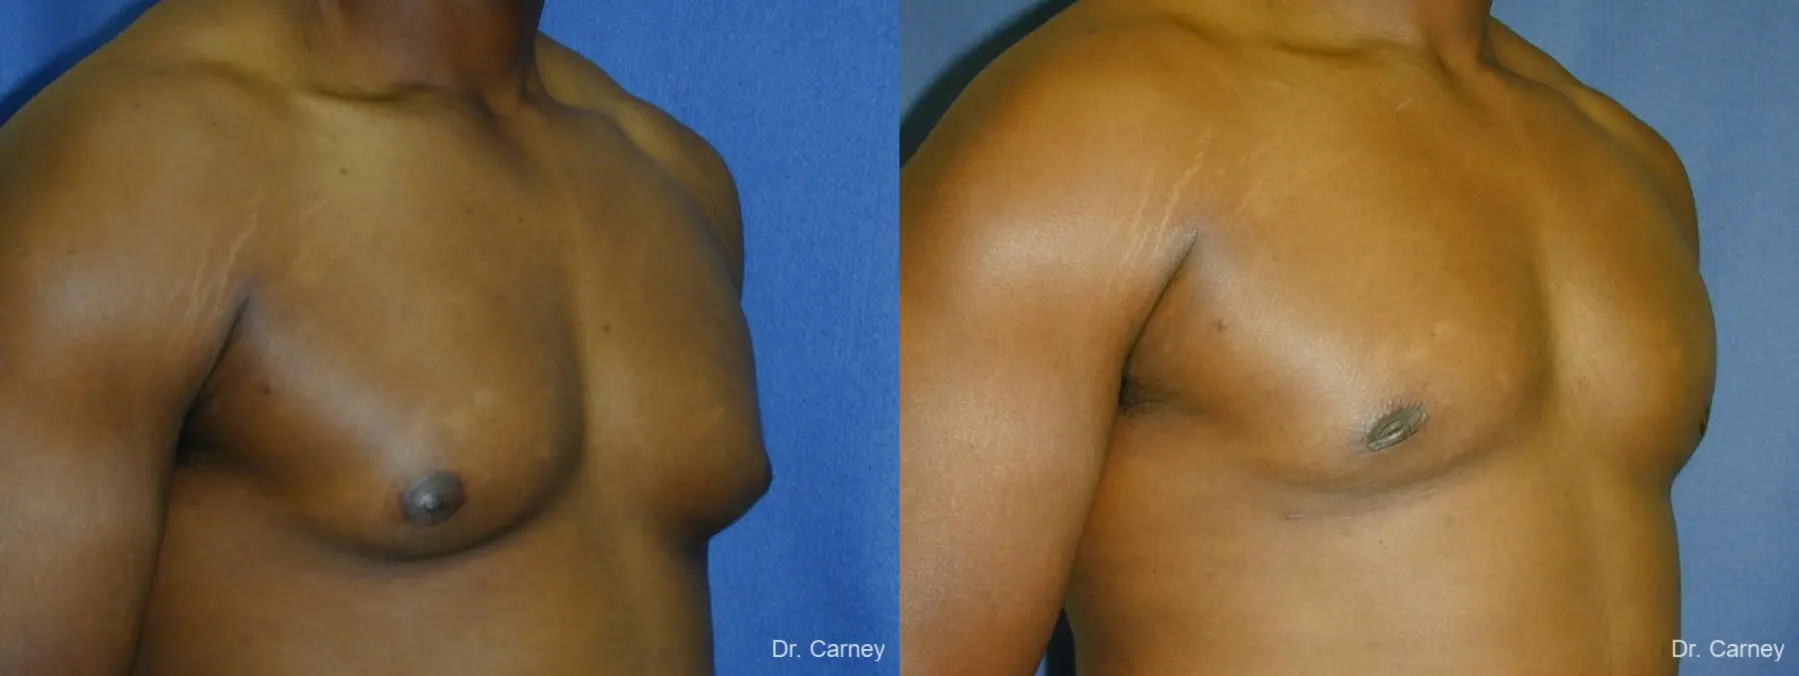 Virginia Beach Gynecomastia 1226 - Before and After 2